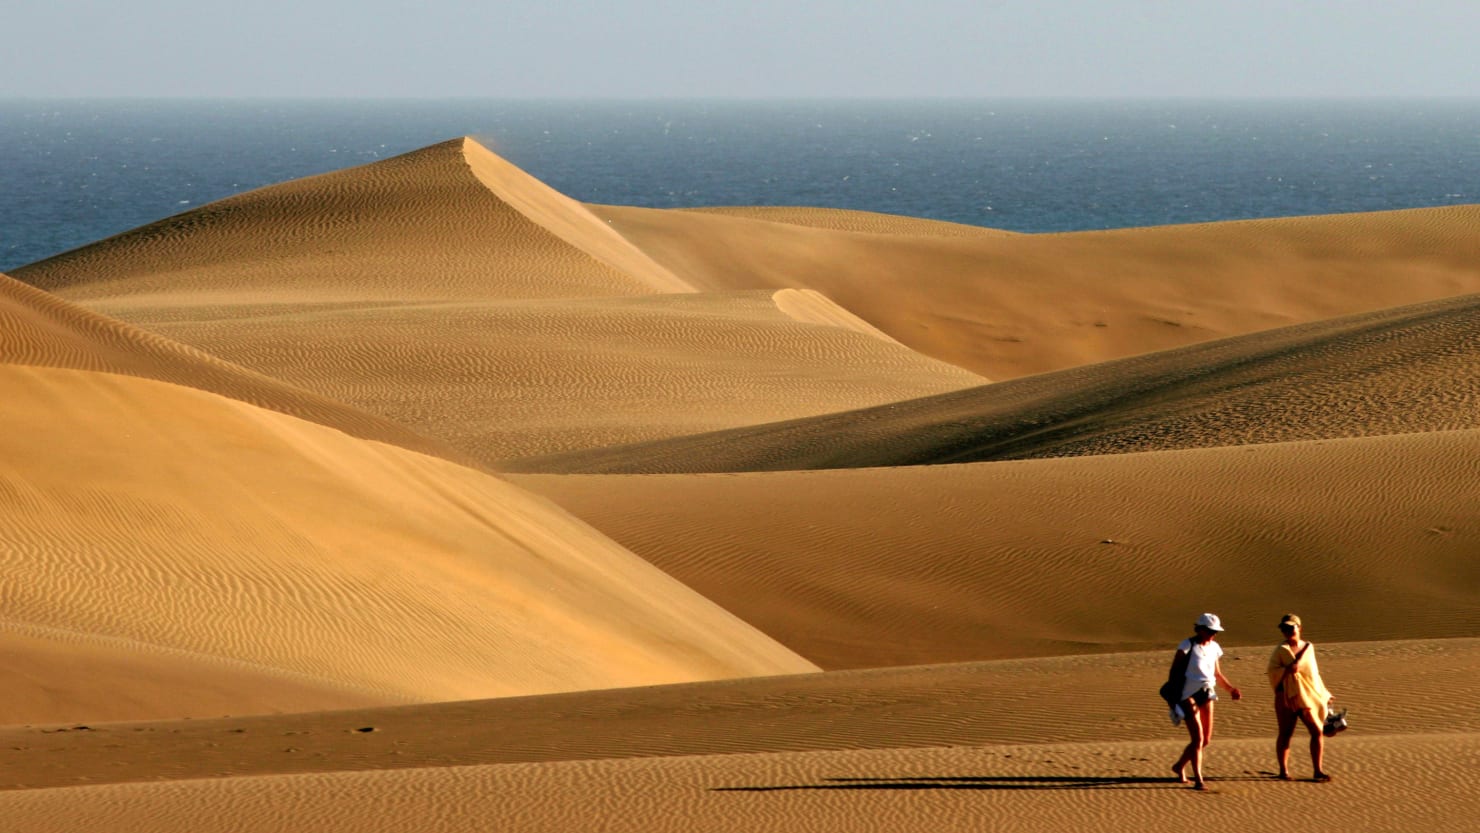 Rampant Sex on the Beach Is Destroying Fragile Sand Dunes in Canary Islands, Researchers